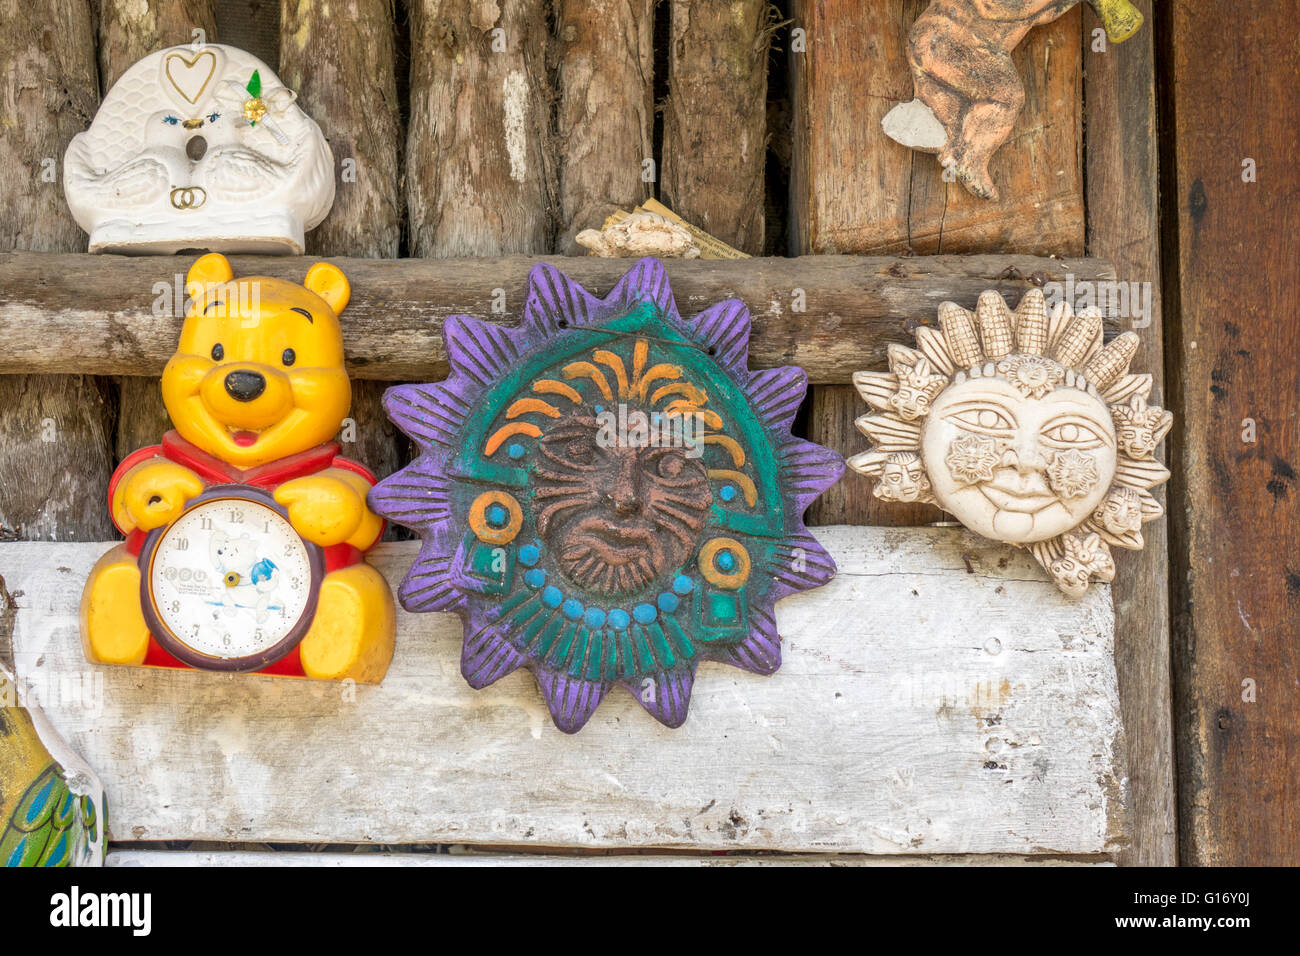 A Winnie The Pooh Cartoon Clock Hanging On A Mexican Wall With Mayan Wall Plaques Stock Photo